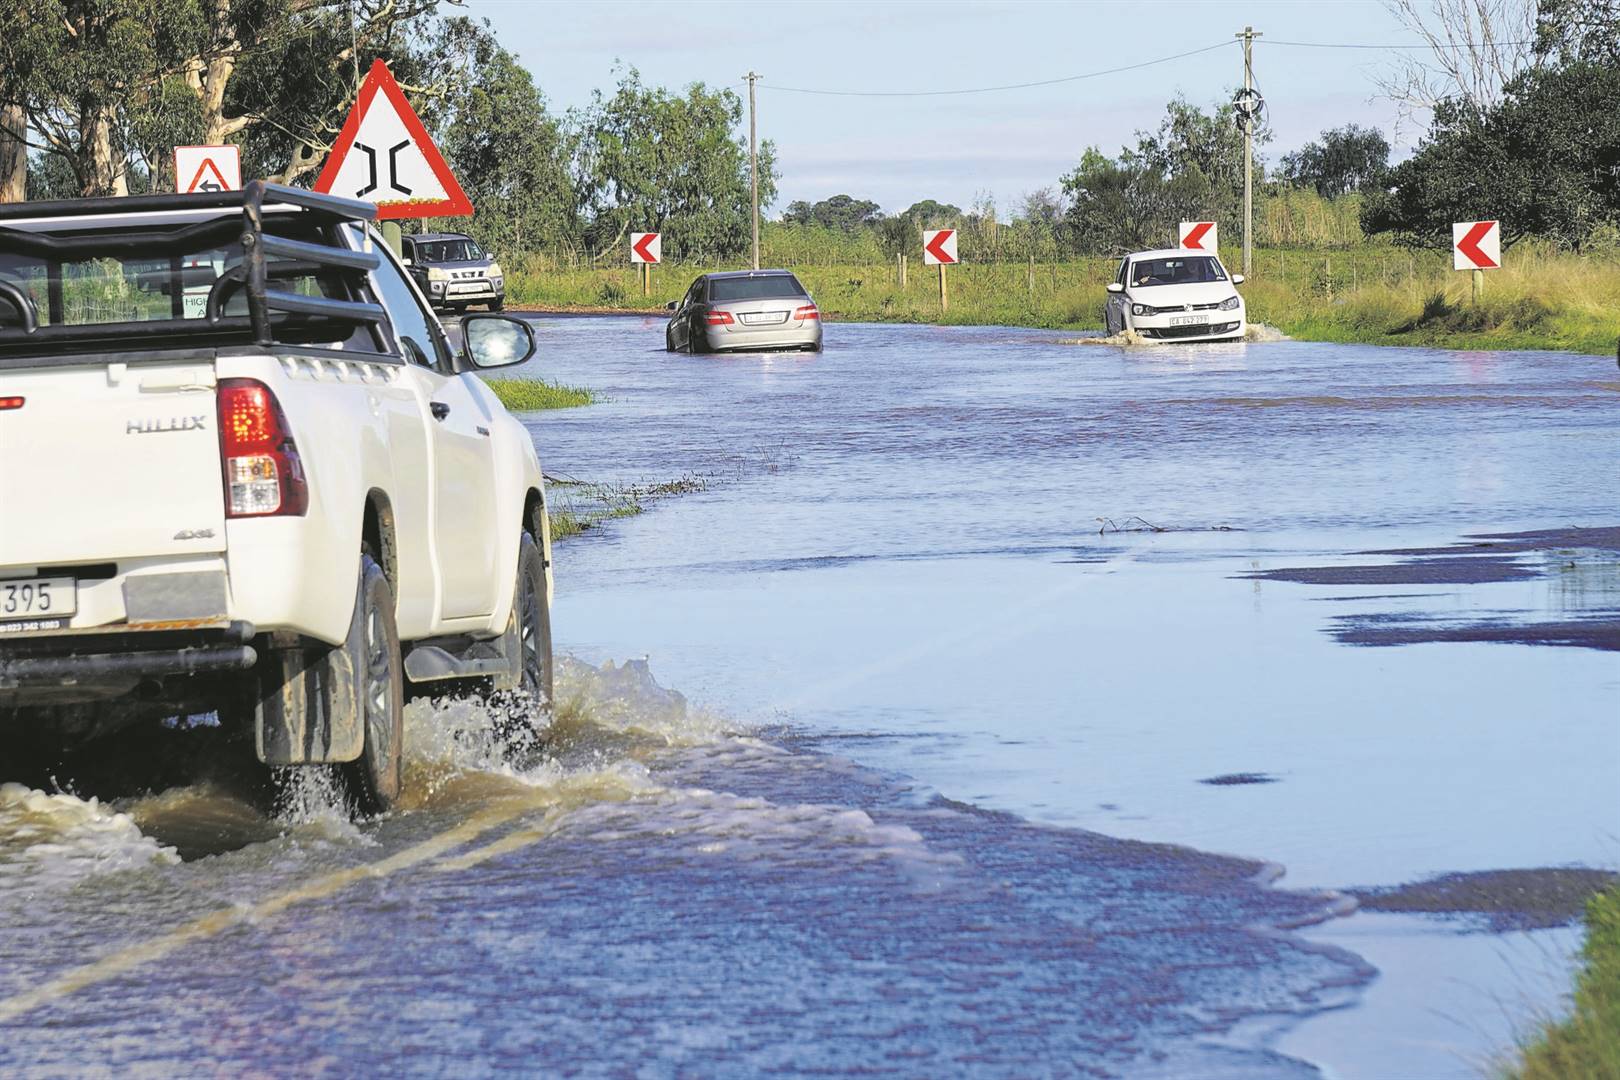 The road between Struisbaai and Bredasdorp is flooded and motorists are warned that they make use of this route at own risk.Photo: CAM Communications